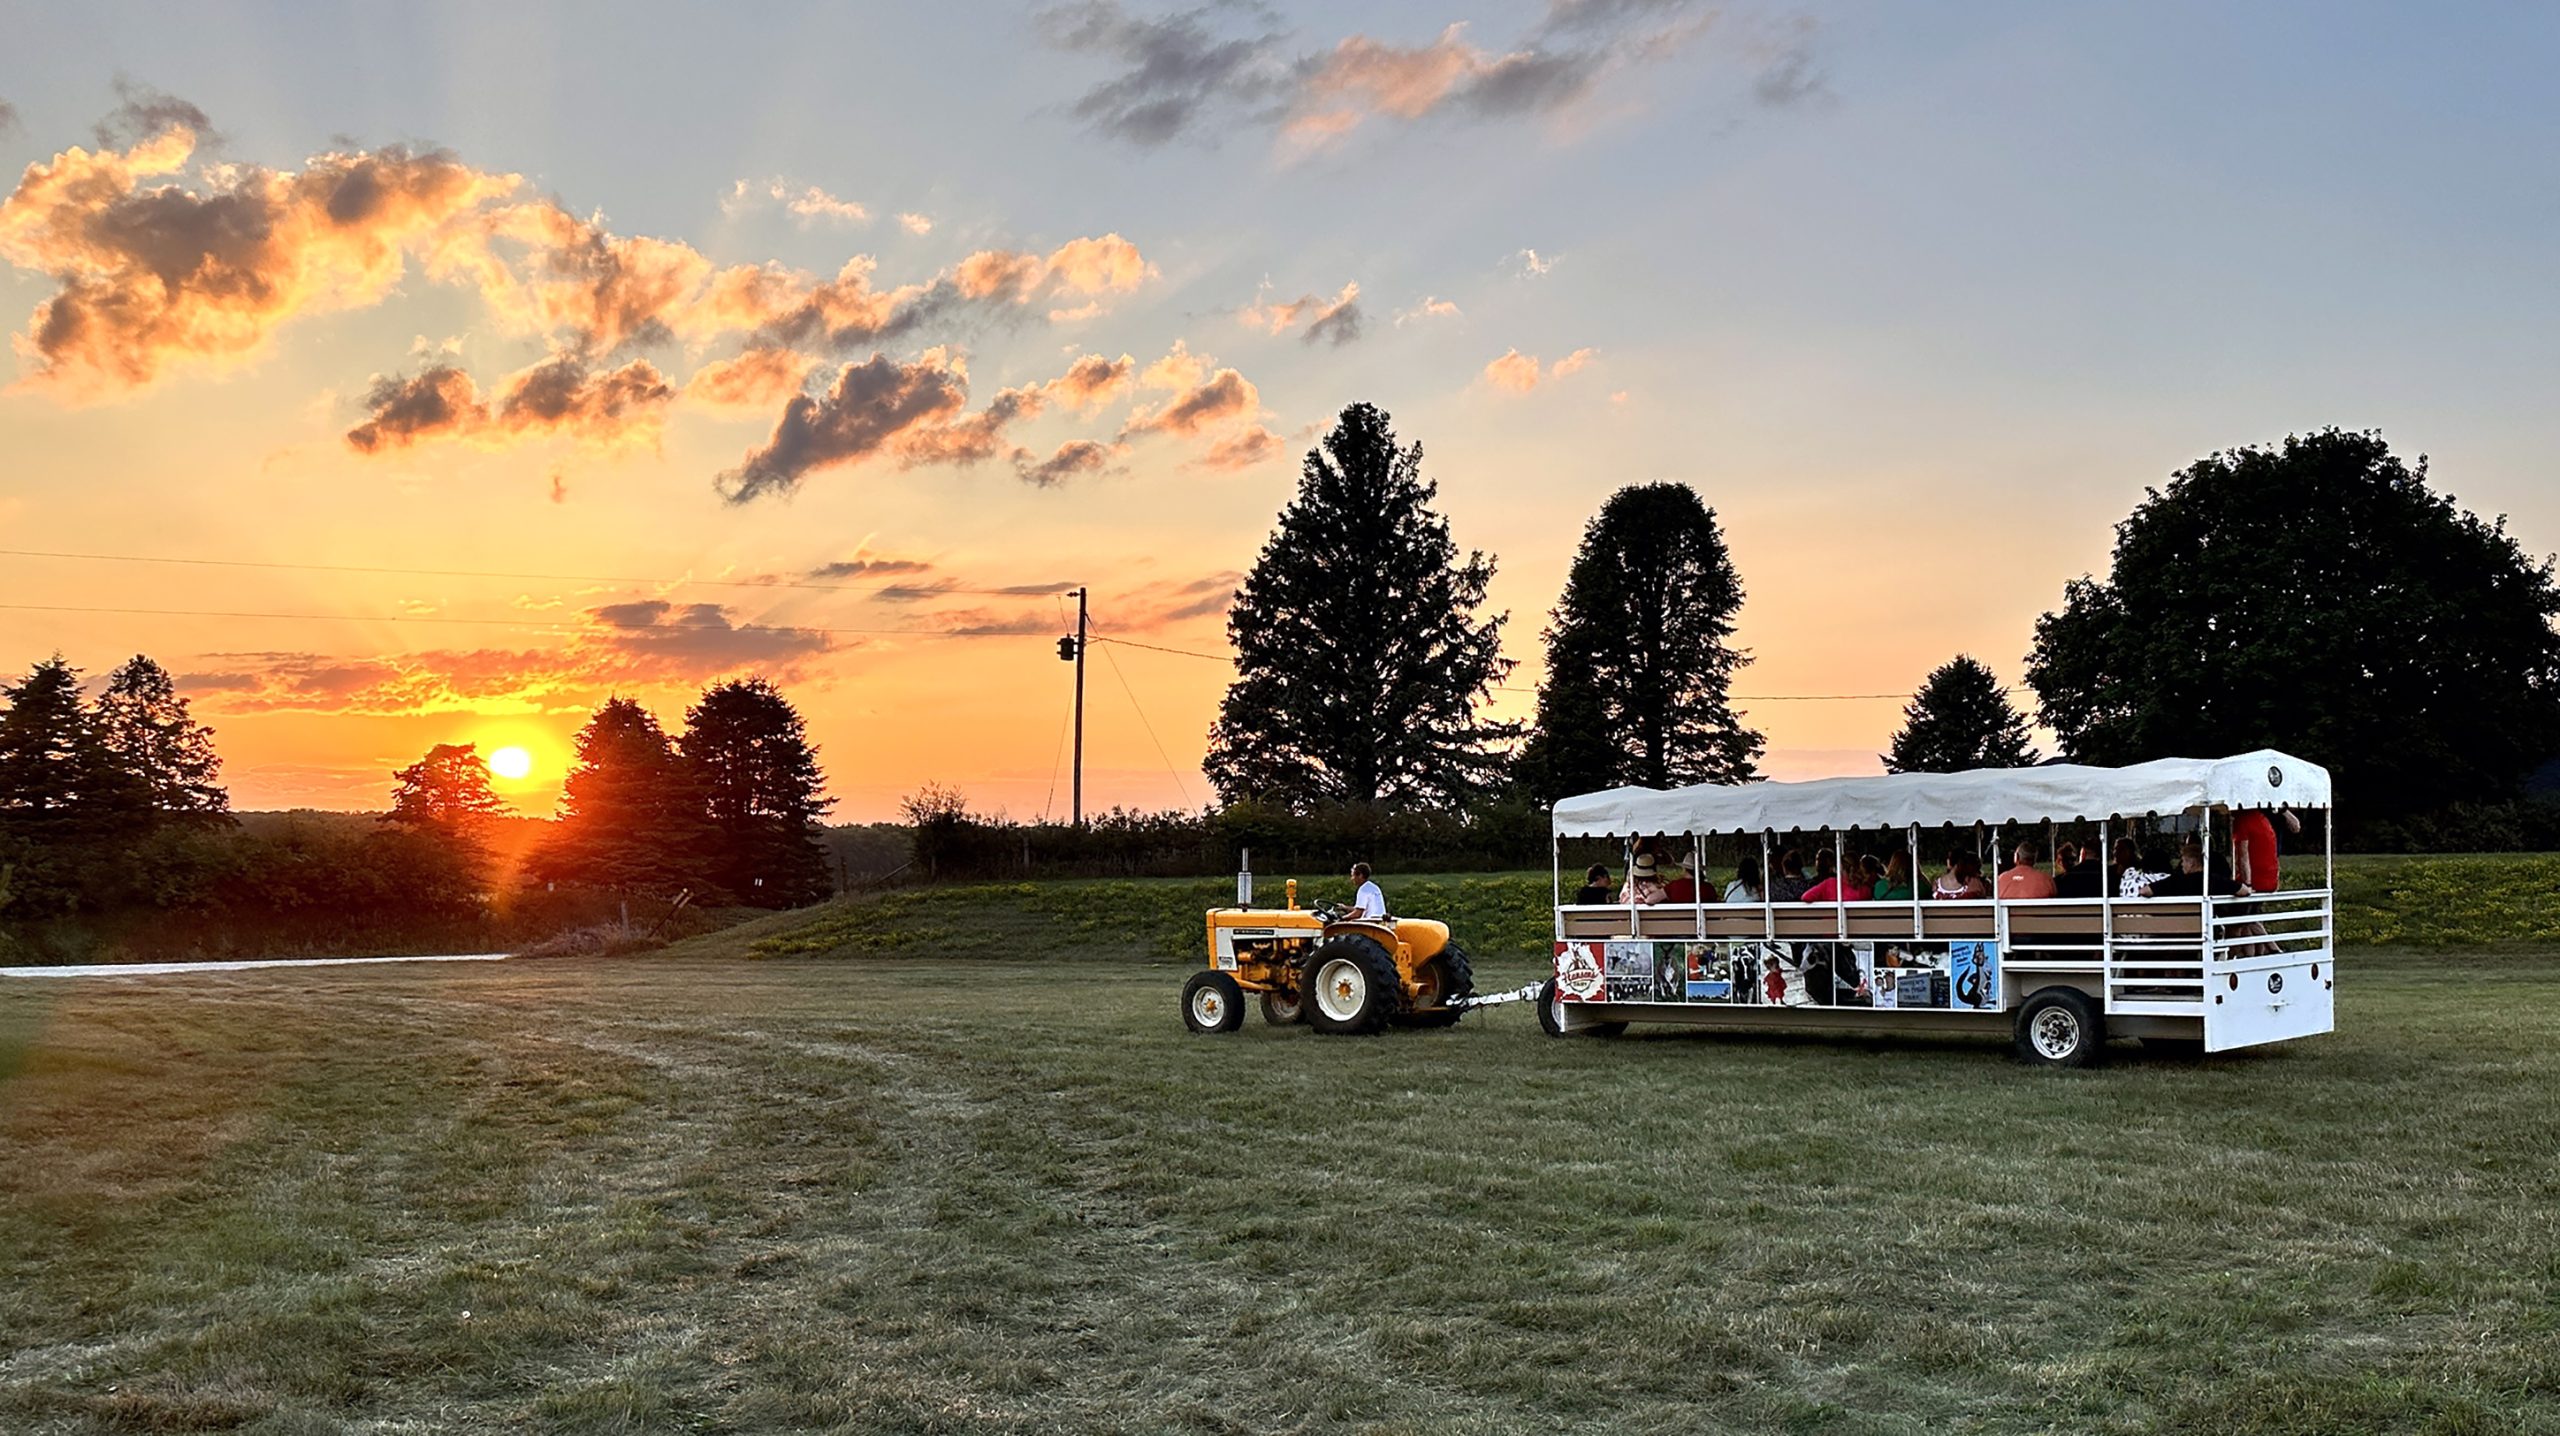 hansen's dairy trolly with guests at sunset